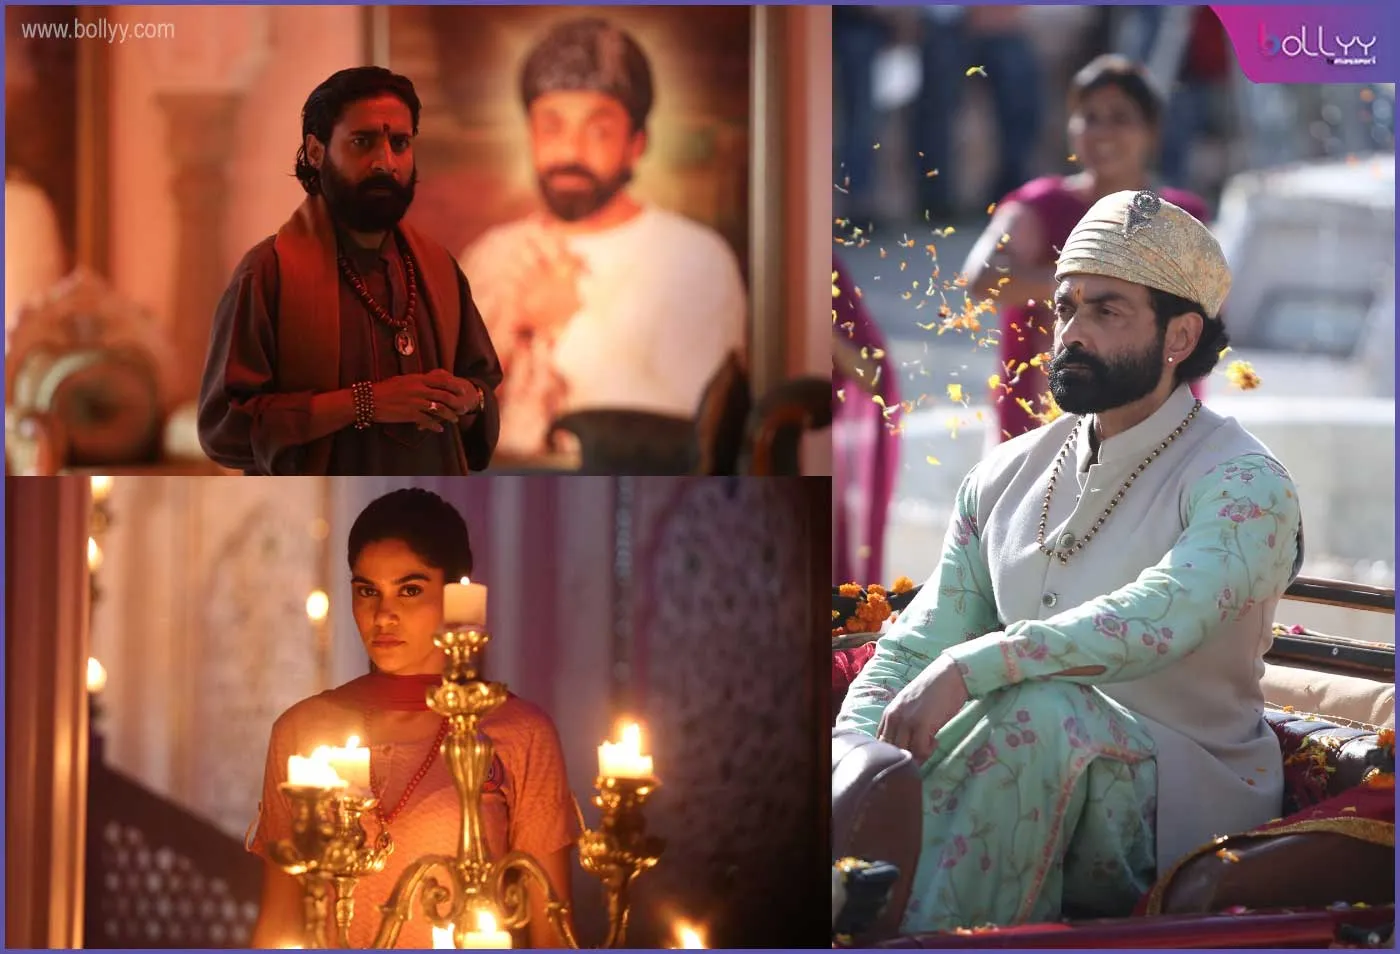 From Bobby Deol as Baba Nirala to Chandan Roy Sanyal as Bhopa, Dive into the lives of characters of MX Player's Aashram as we eagerly wait for Season 4